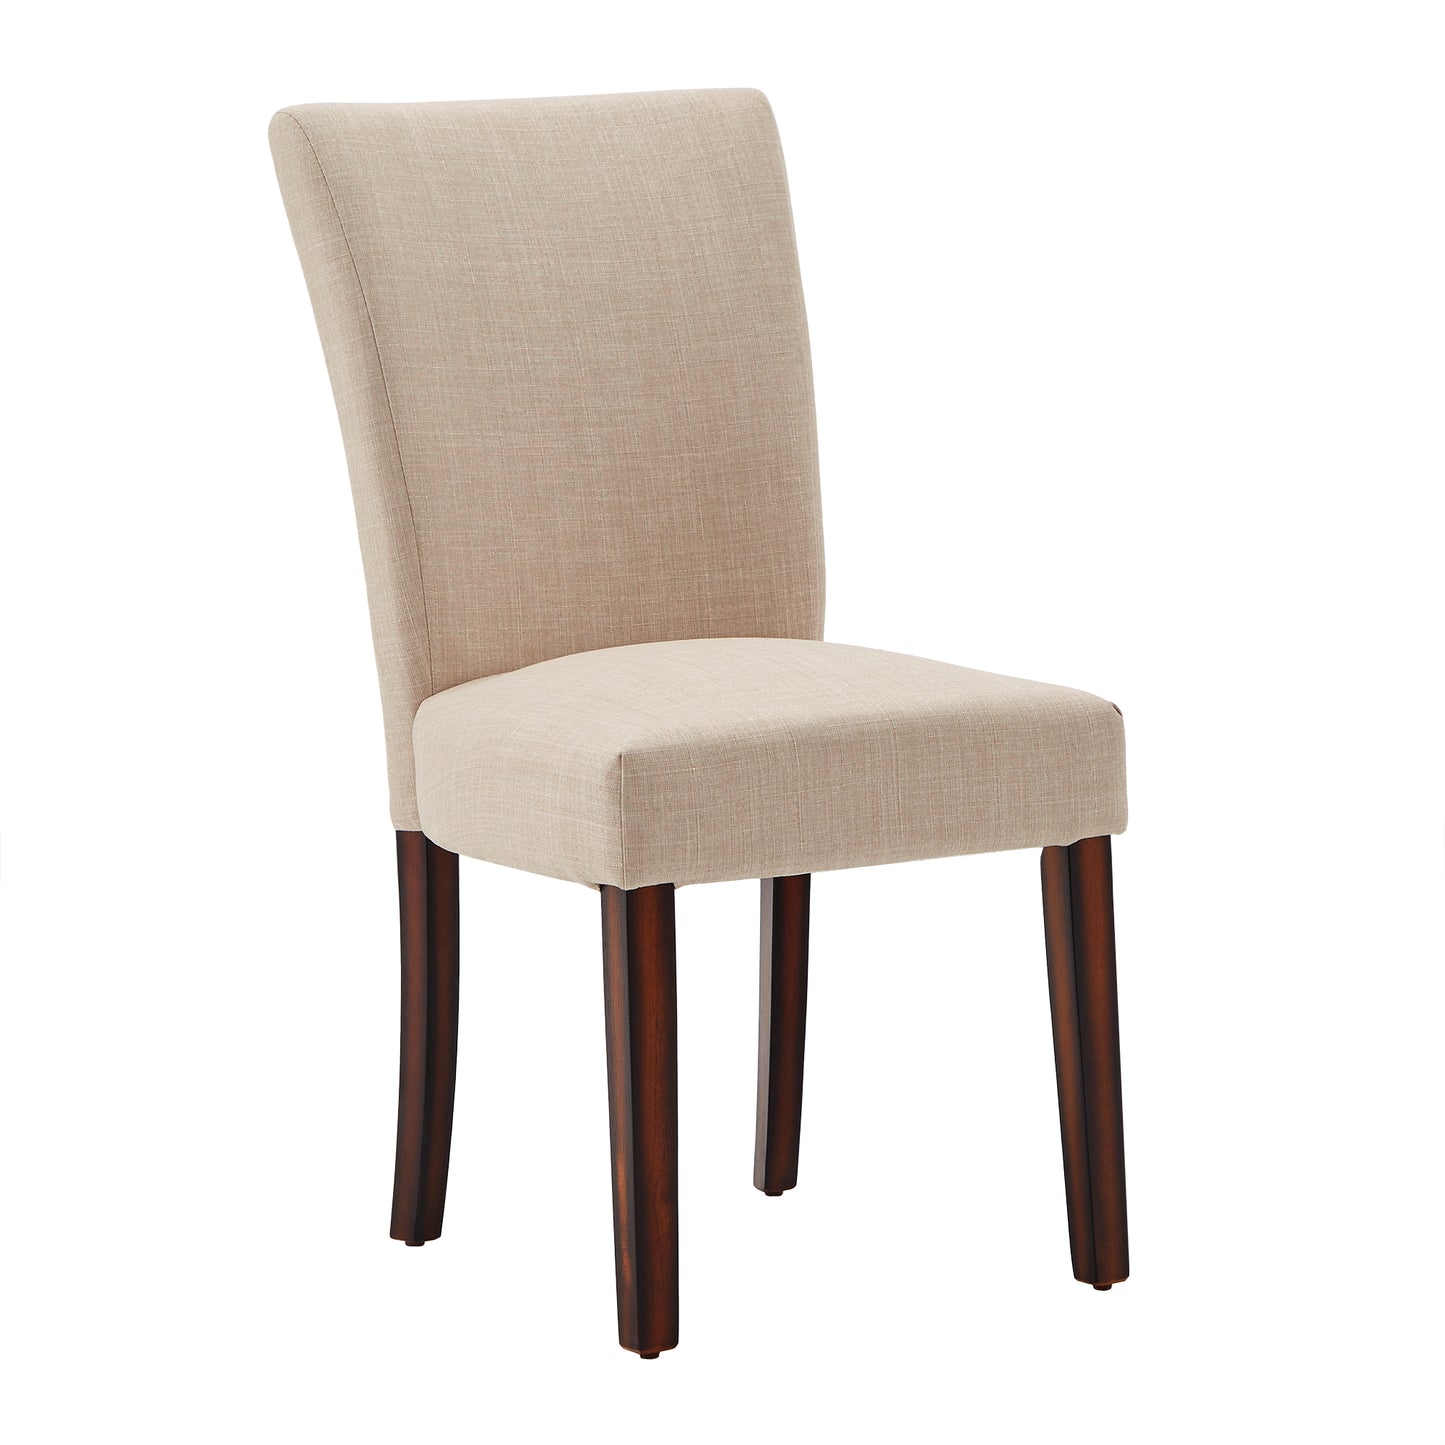 Linen Parsons Dining Chairs (Set of 2) - Espresso Finish, Beige